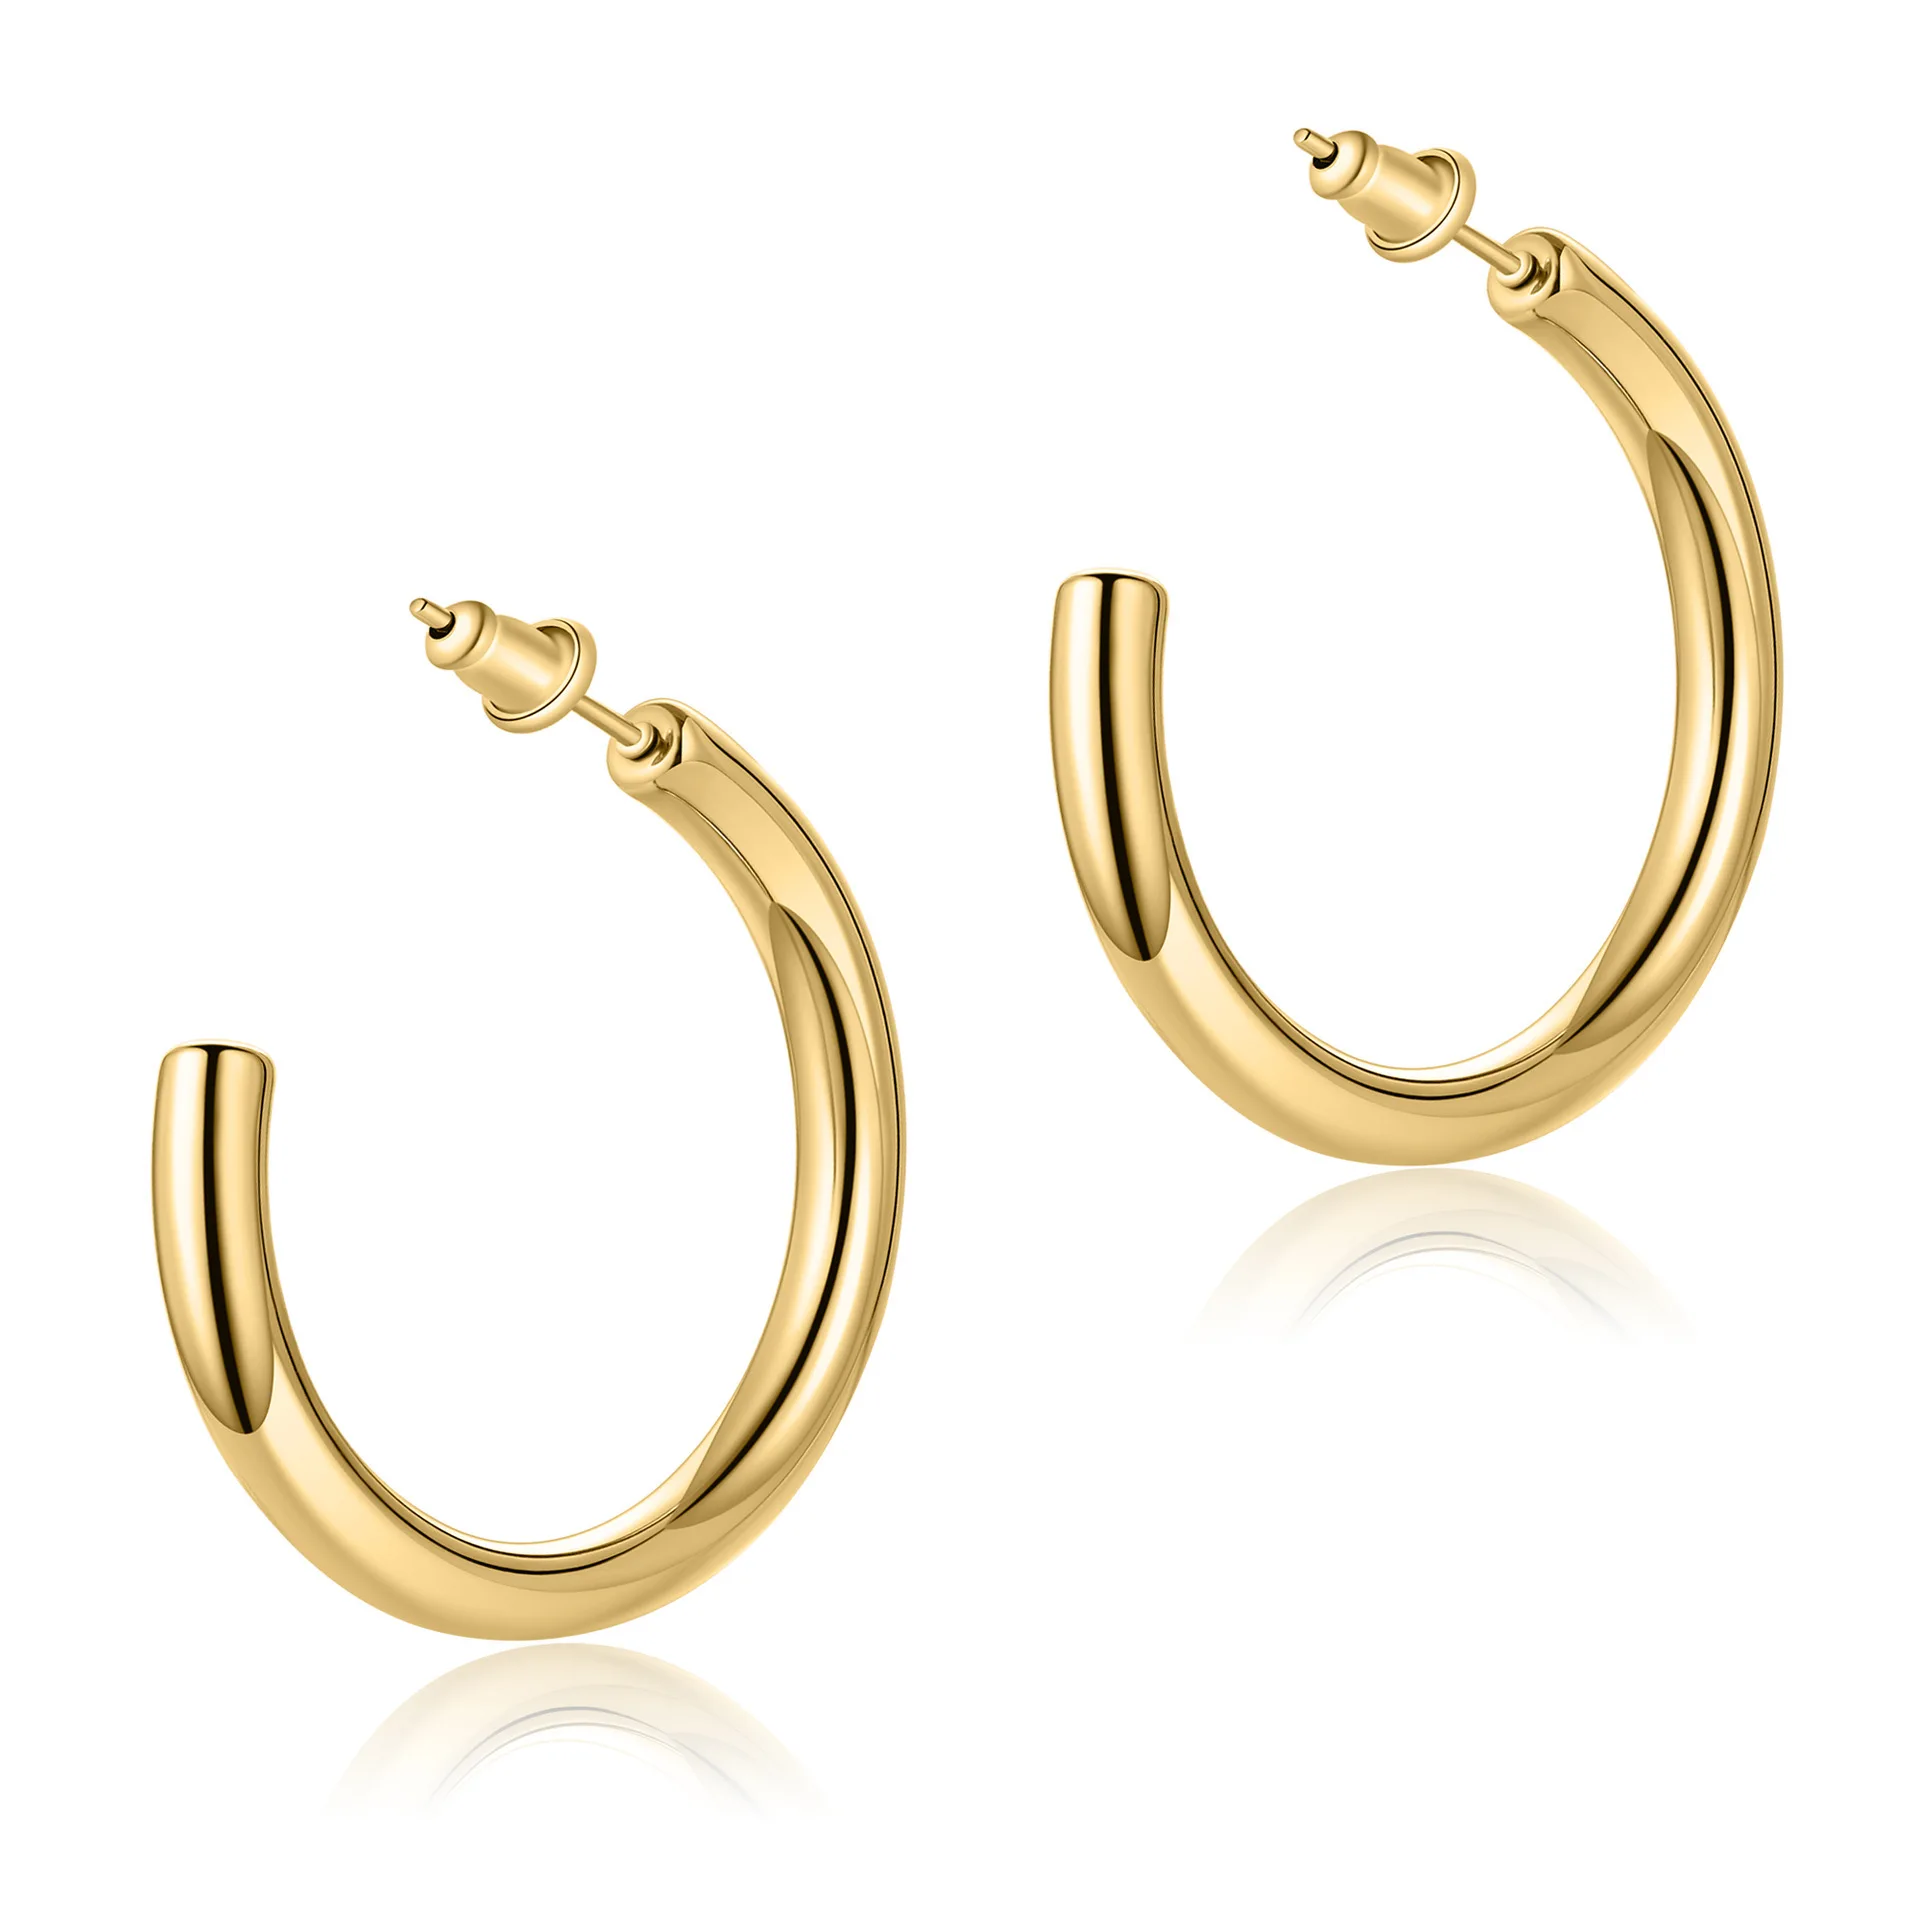 

Fashion Jewelry Statement Hollow simple hoop earrings 14k solid gold hoop earrings earring hoops for jewellery making